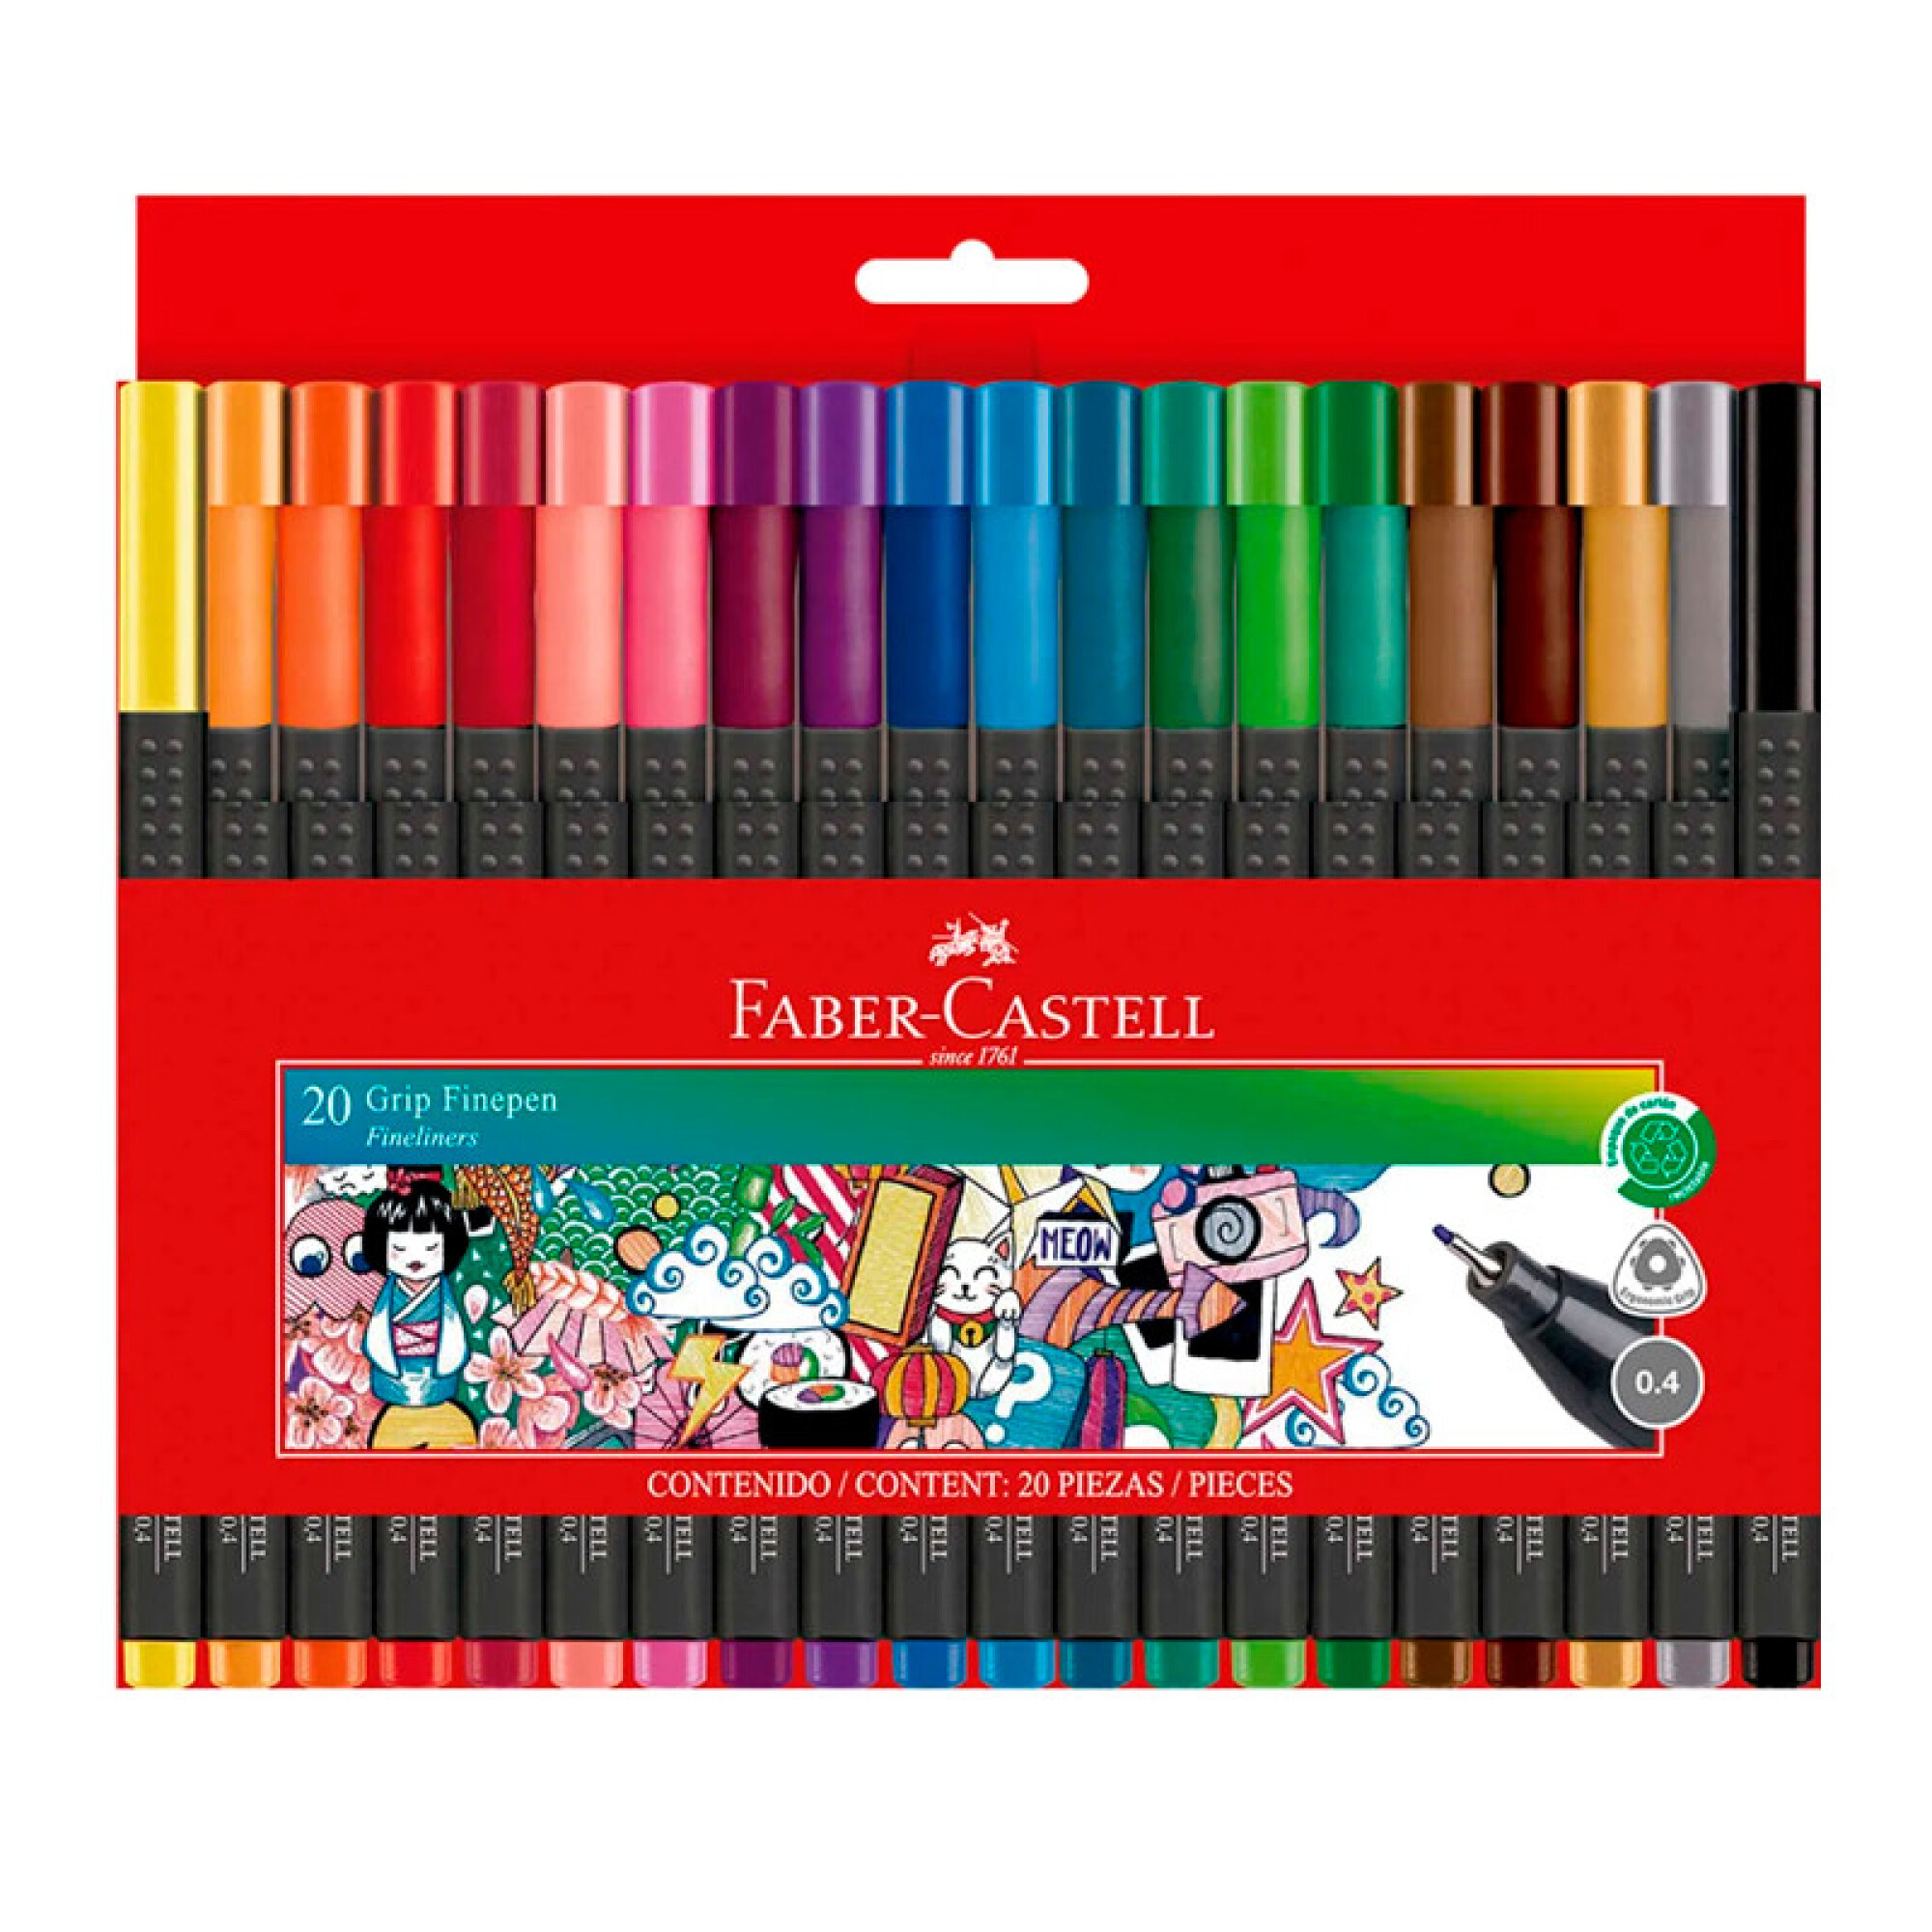 Franjamar on Instagram: Faber Castell 20 Grip Finepen Rotuladores/  Fineliners